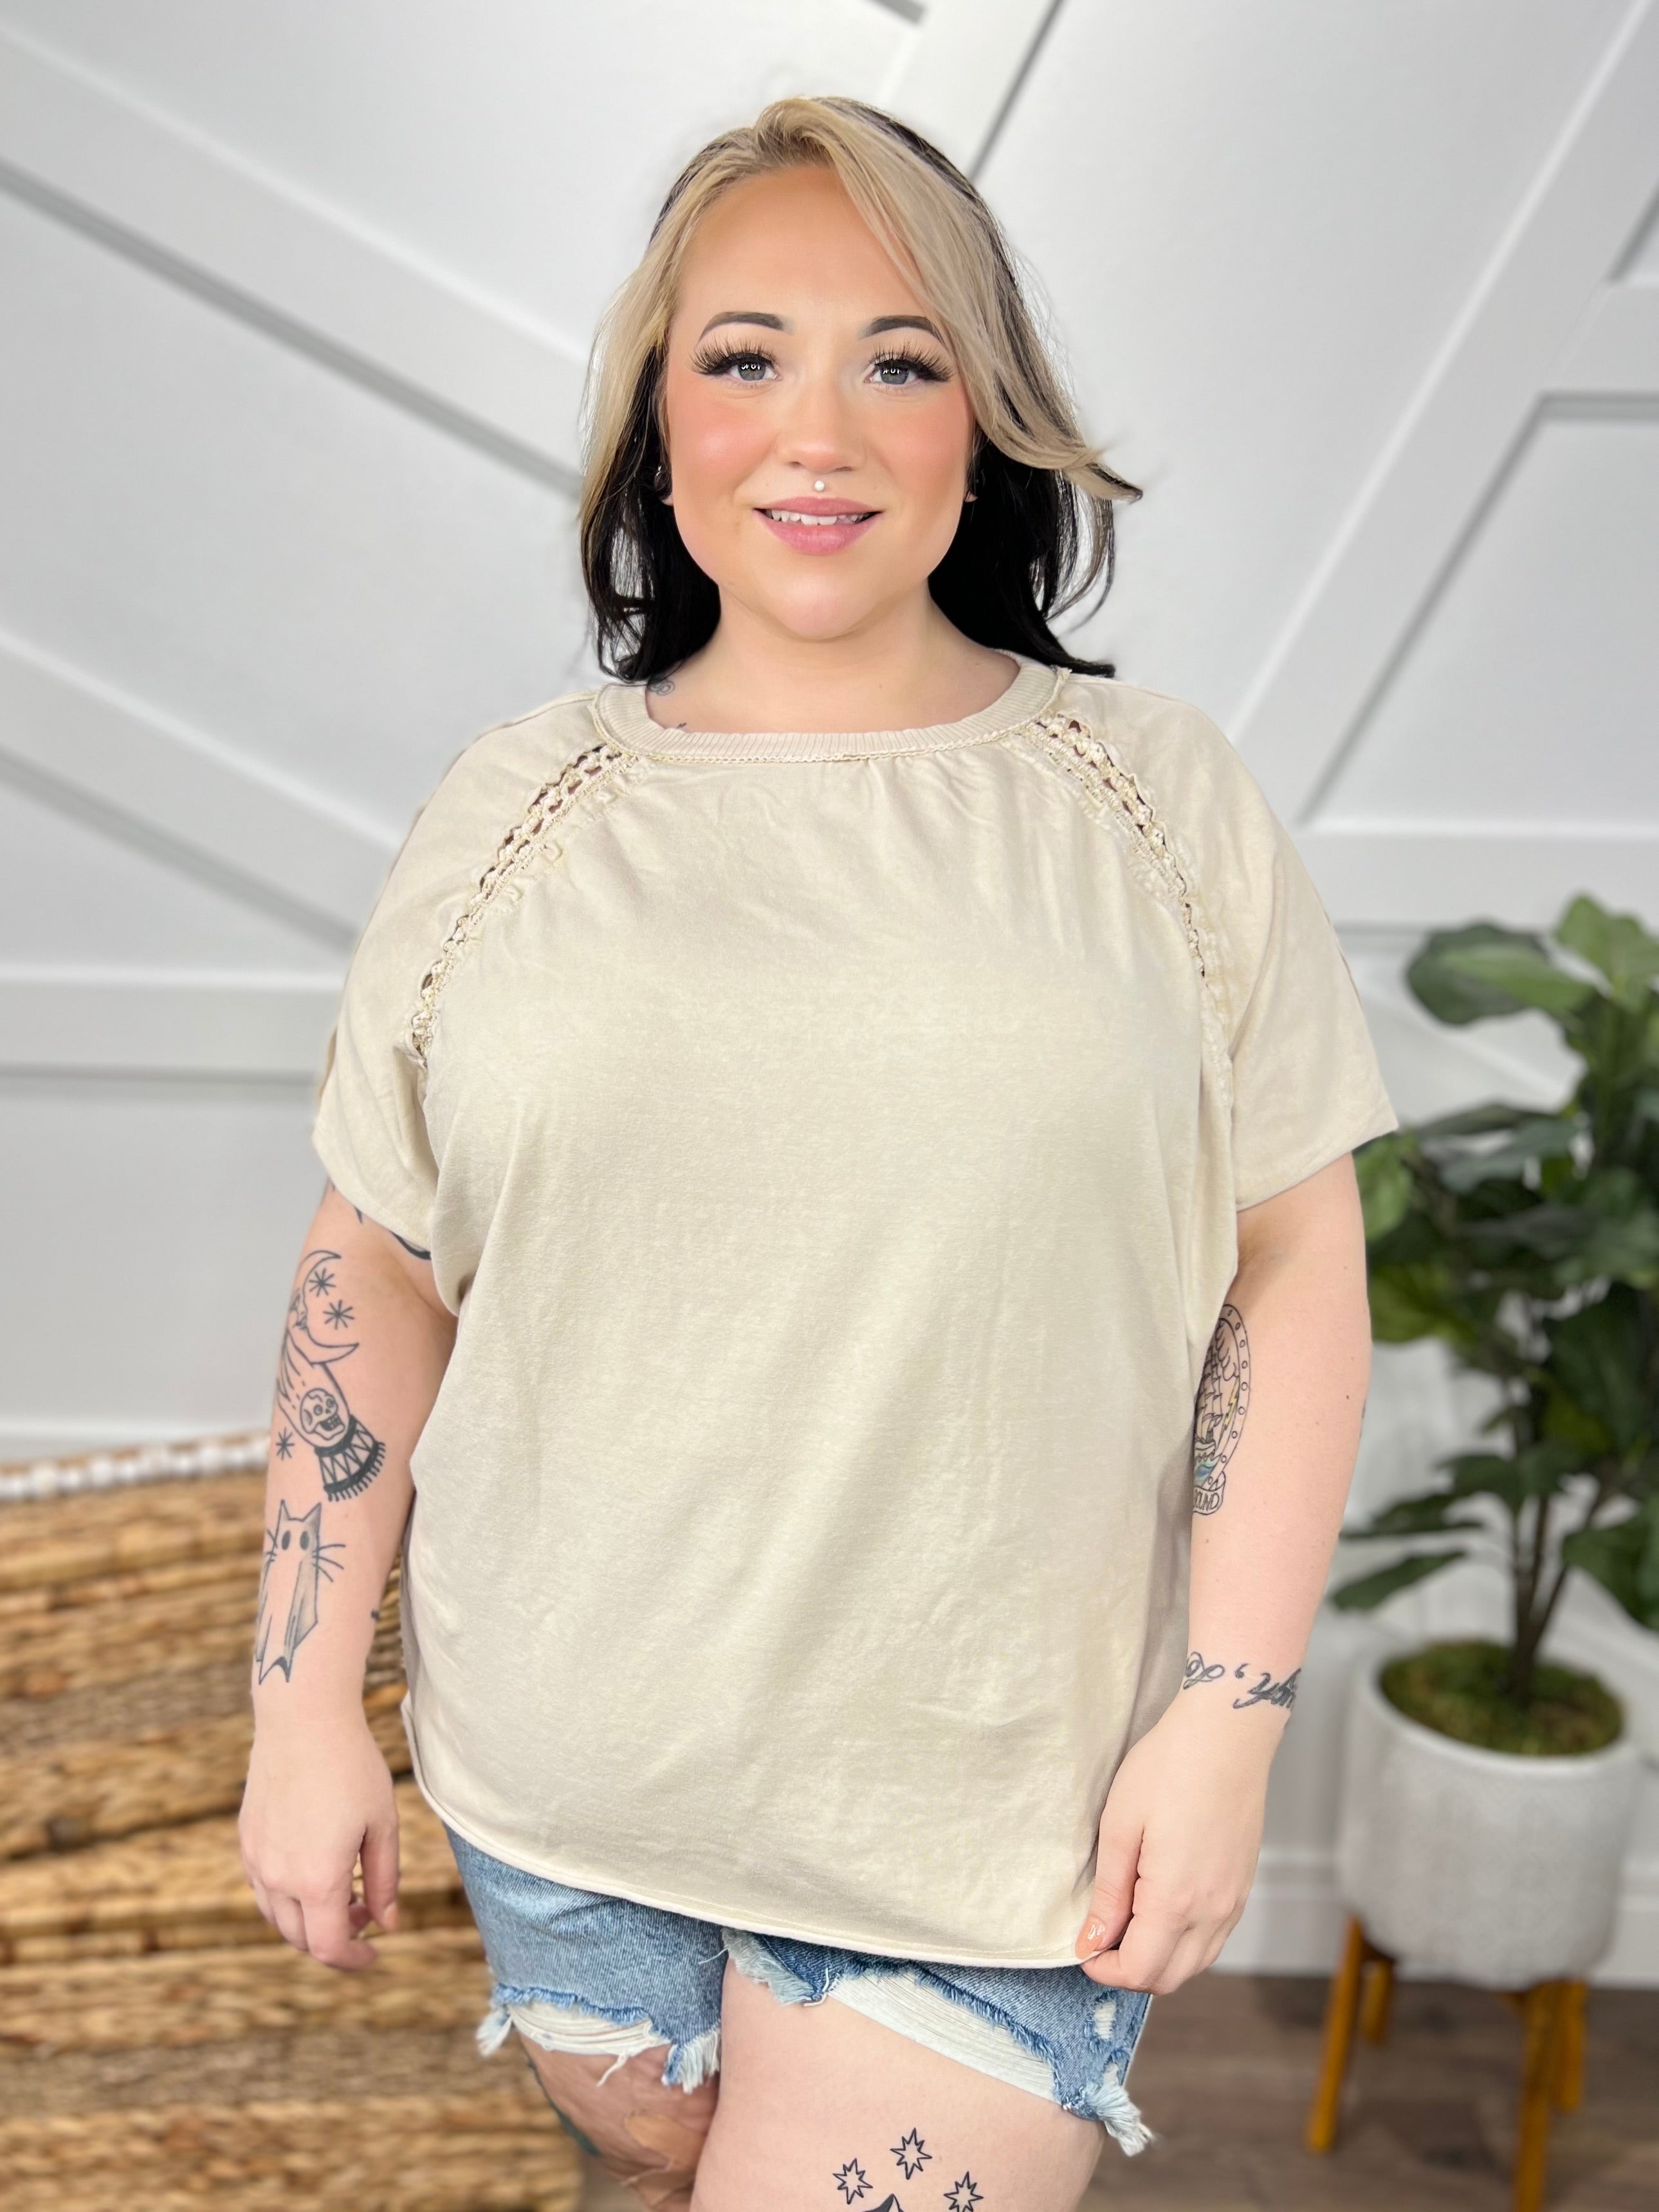 Very Best Top-110 Short Sleeve Top-J. Her-Heathered Boho Boutique, Women's Fashion and Accessories in Palmetto, FL